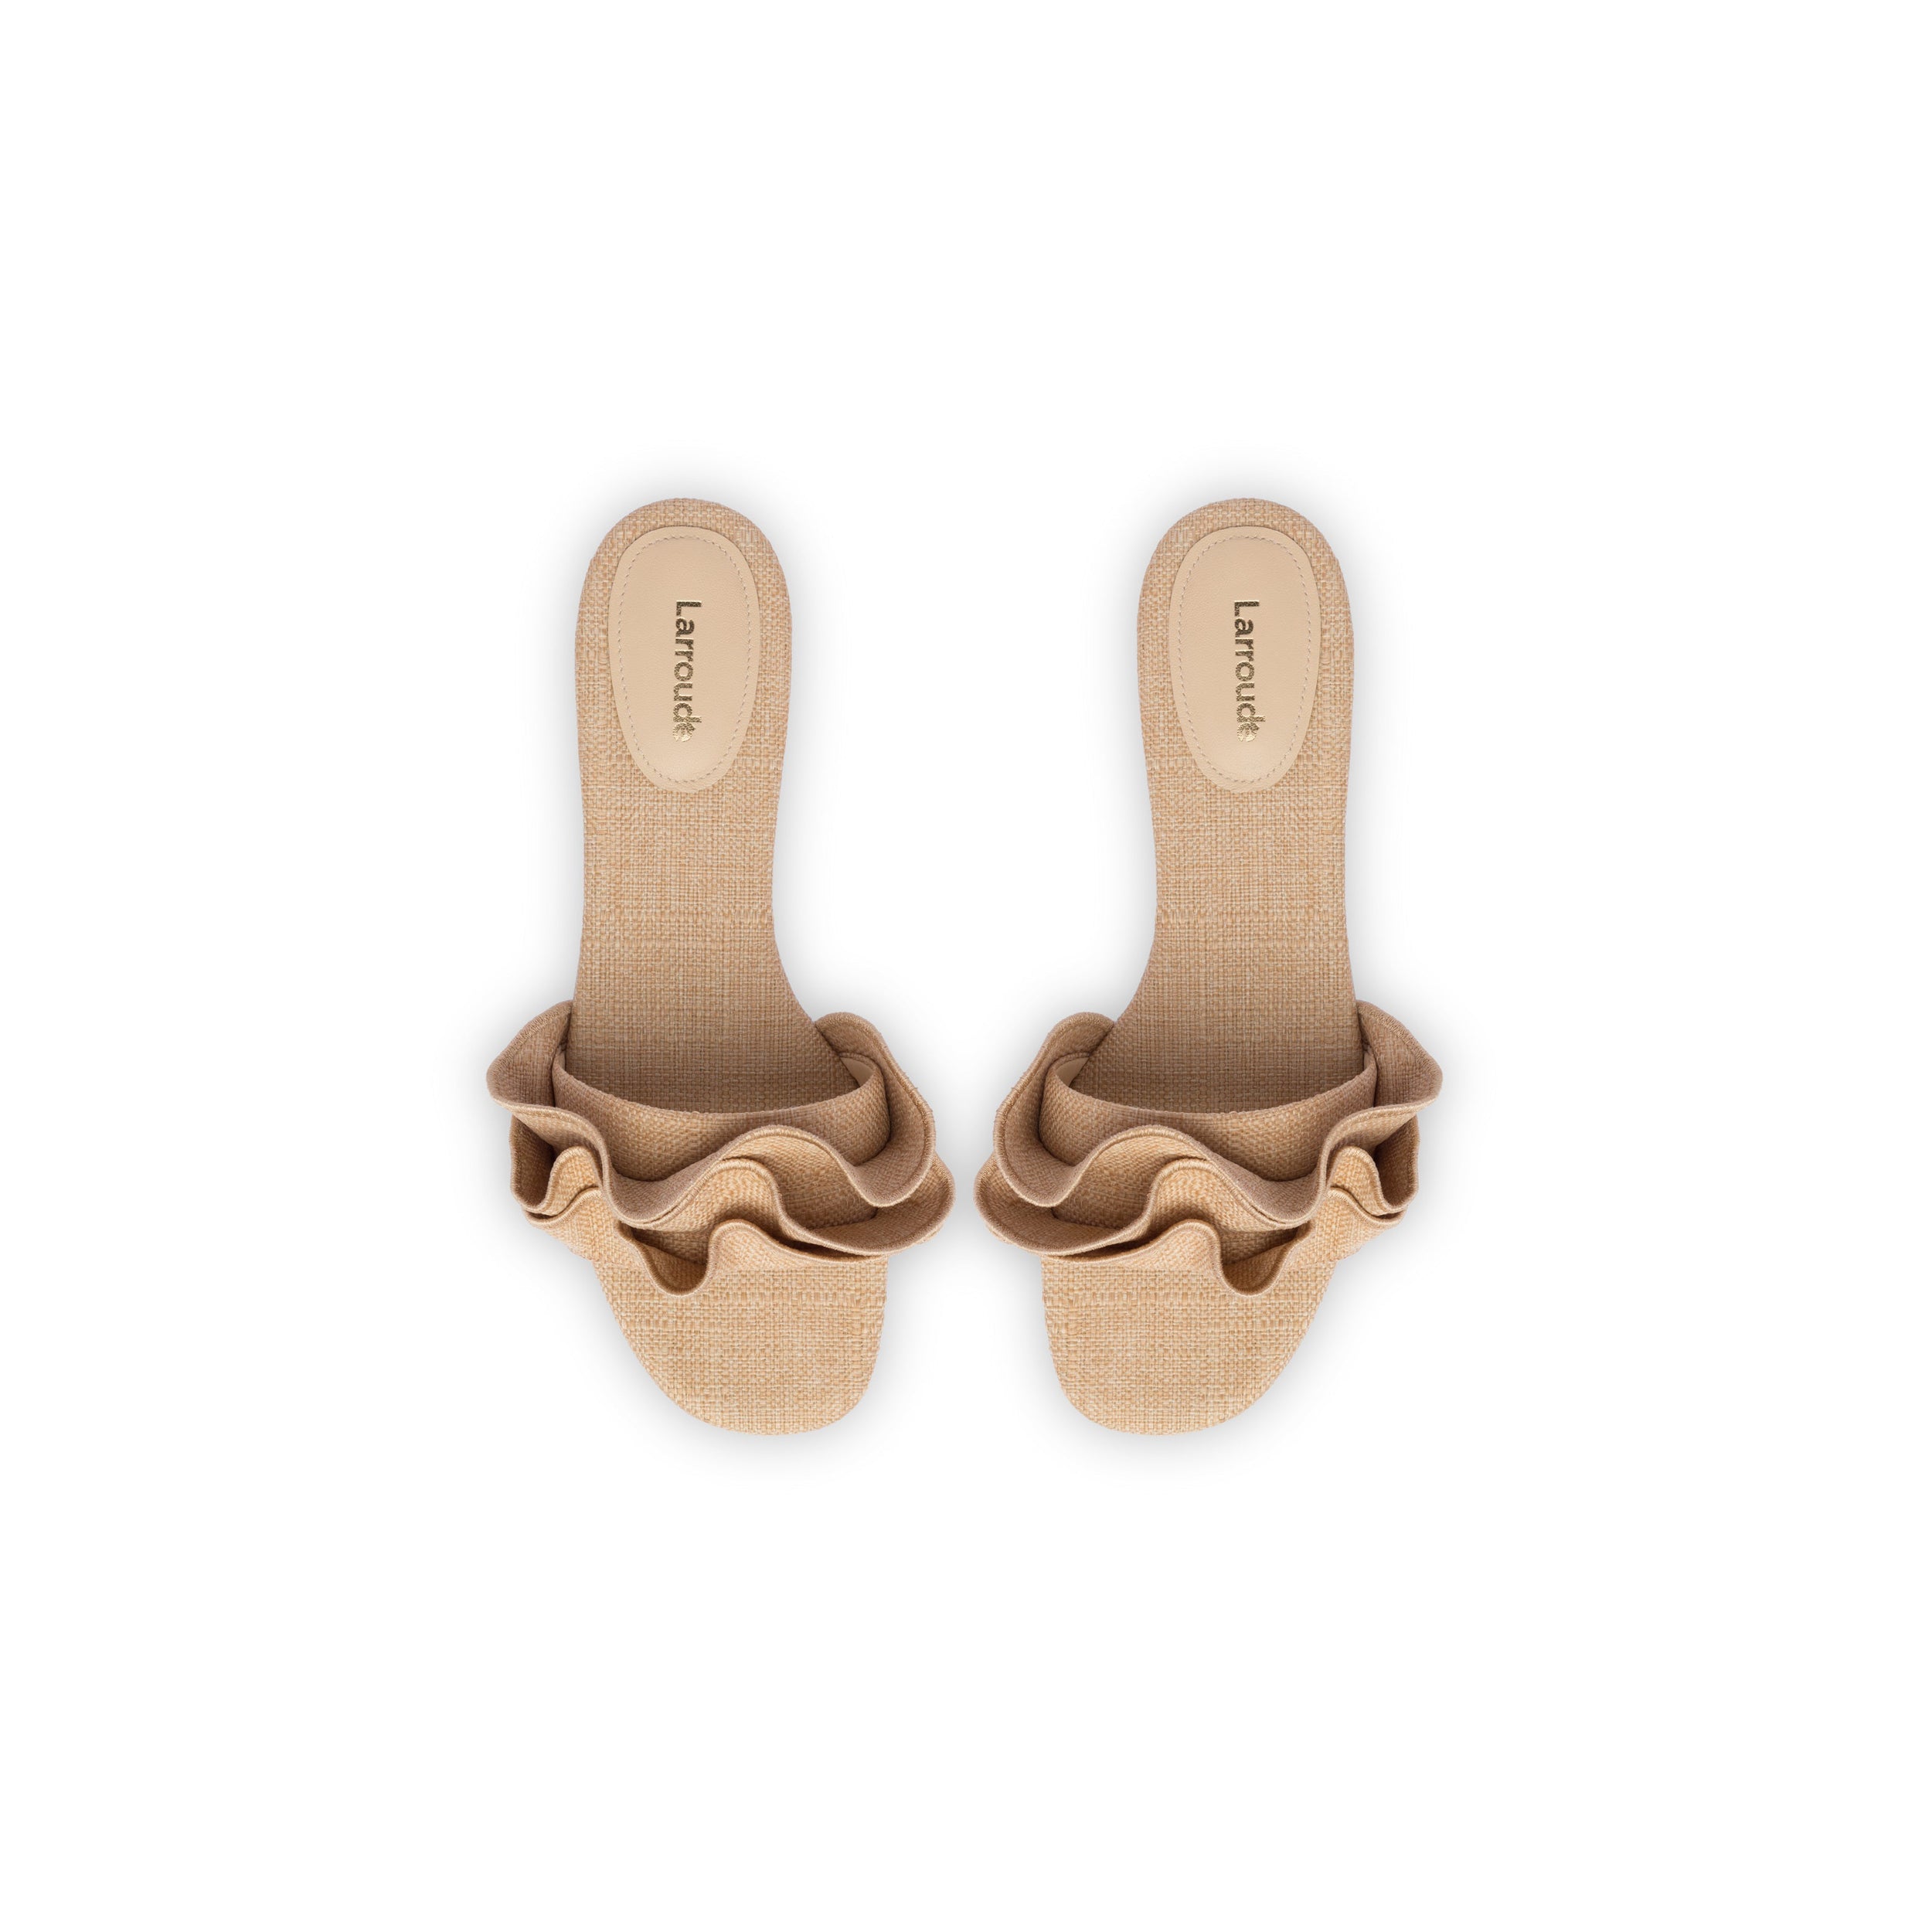 A pair of beige Ivy Ruffle Flat Mule sandals in raffia with cushioned insoles. This bestselling style features wide, textured straps adorned with ruffled detailing. The insoles bear the brand name "Larroudé" printed in black. They are laid out side by side on a plain white background.